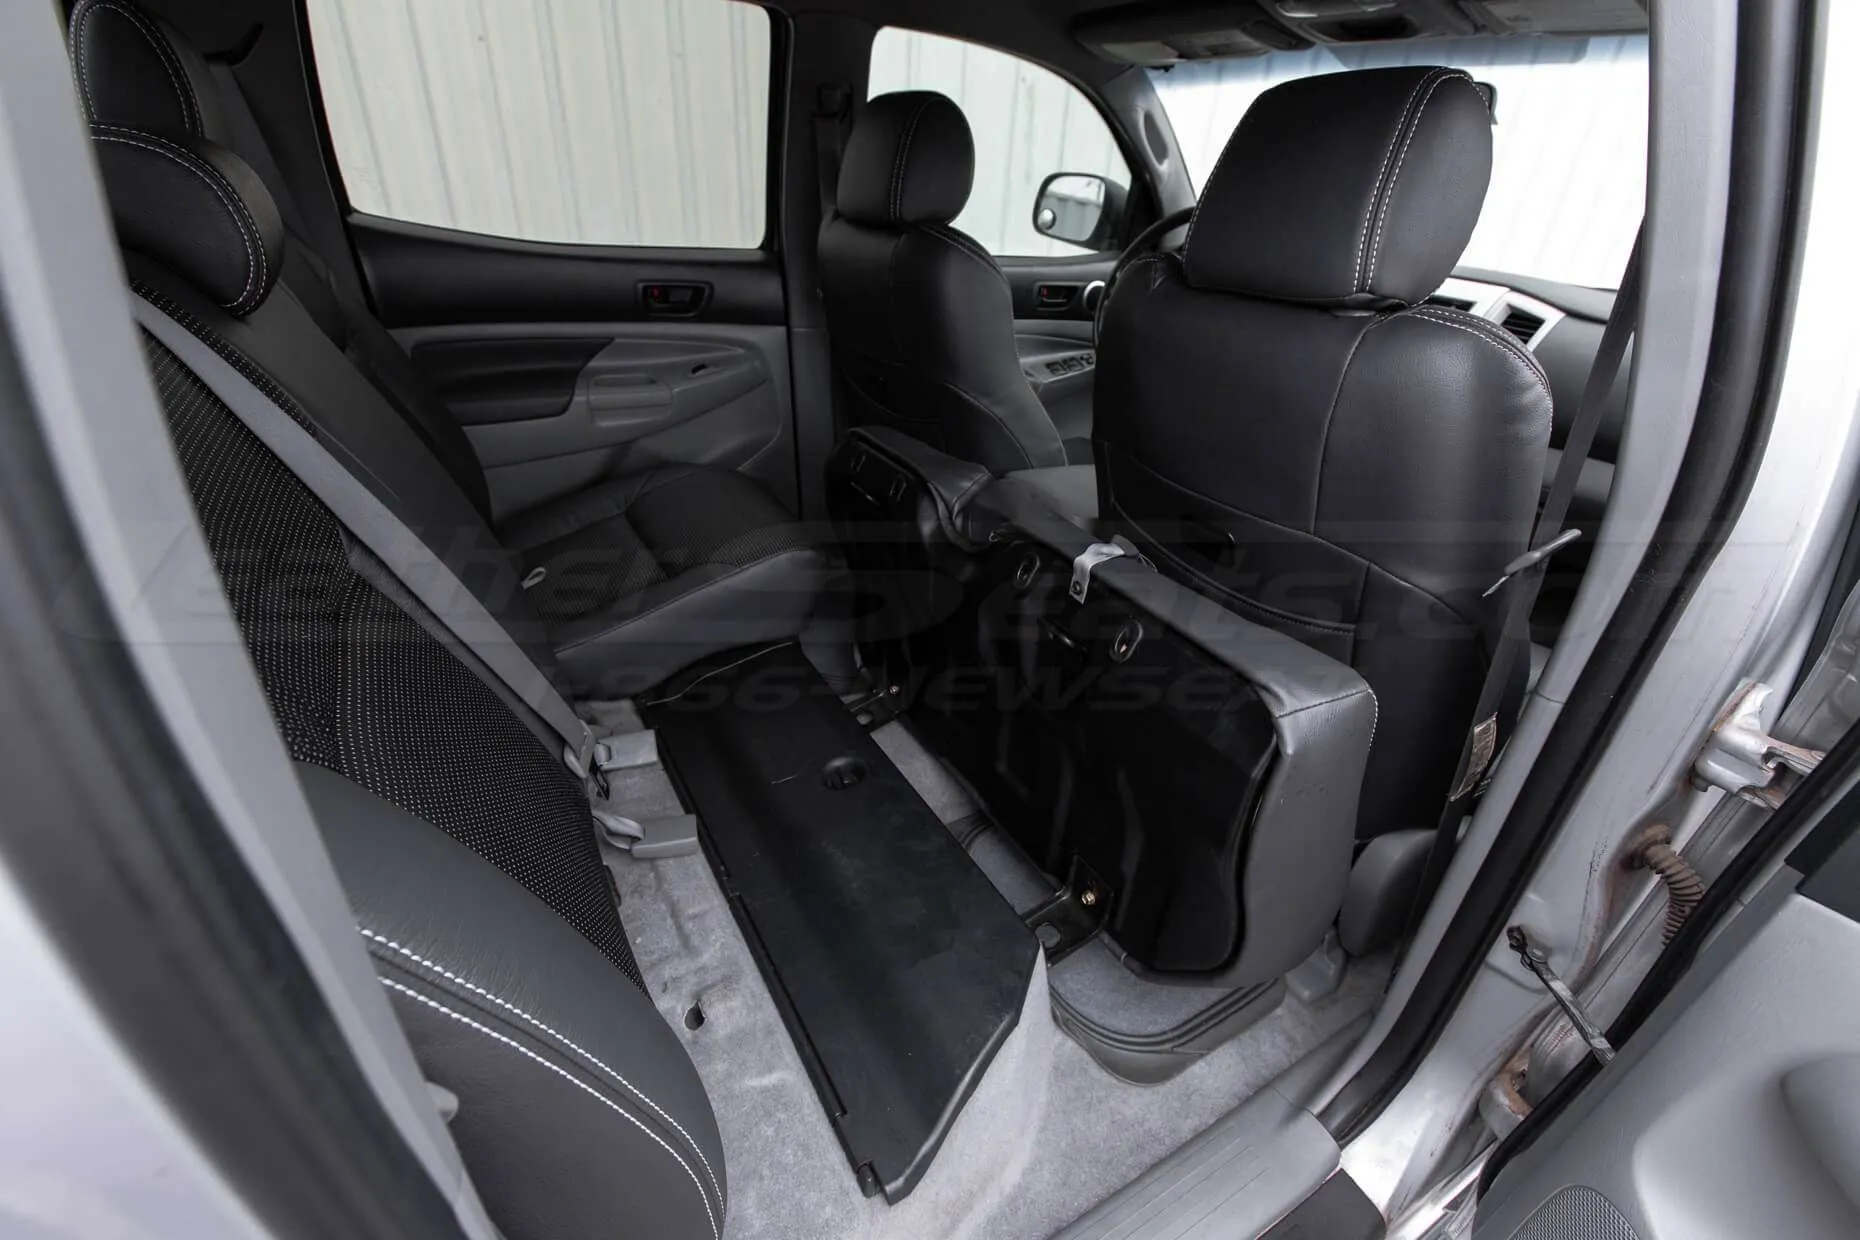 Toyota Tacoma Installed Leather Kit - Black - Installed - Rear seats folded down